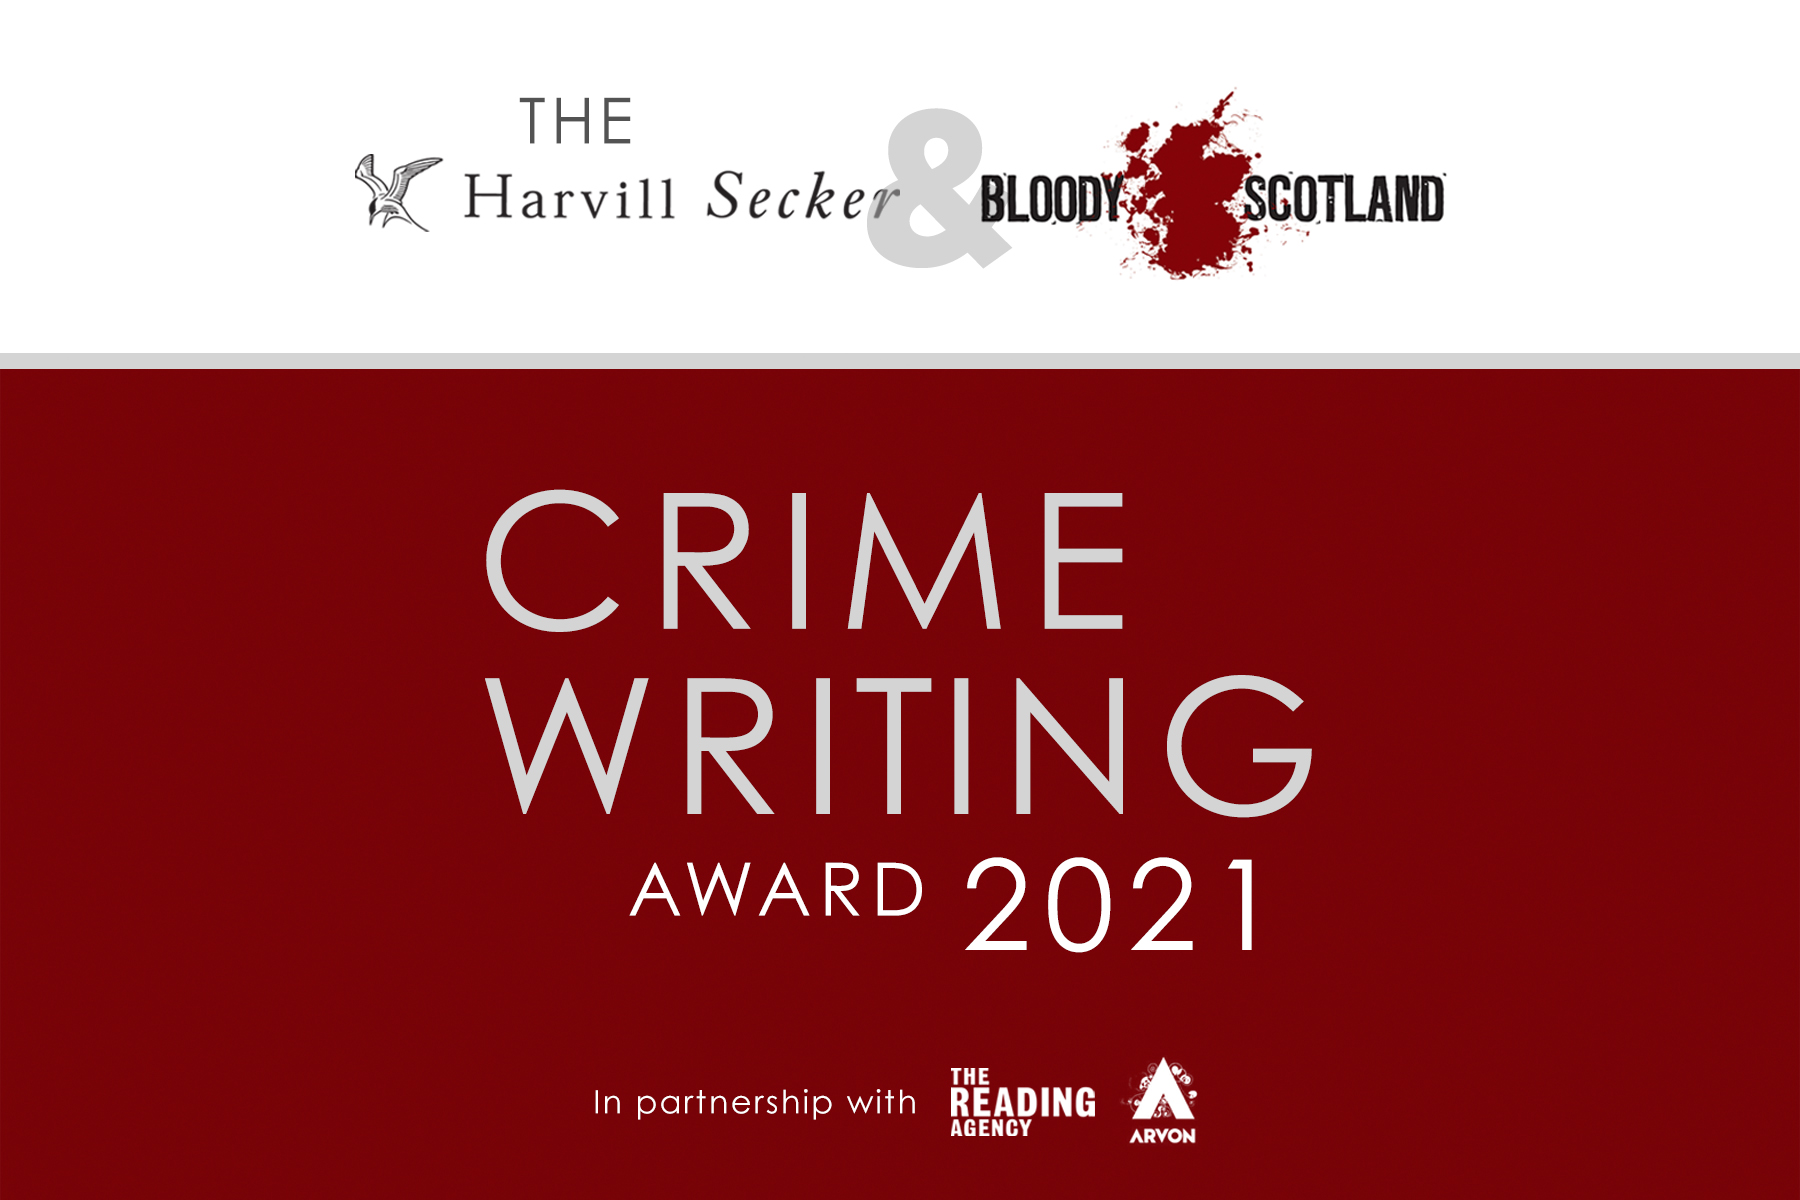 A red-and-white image with text advertising the Harvill Secker and Bloody Scotland Crime Writing Award 2021